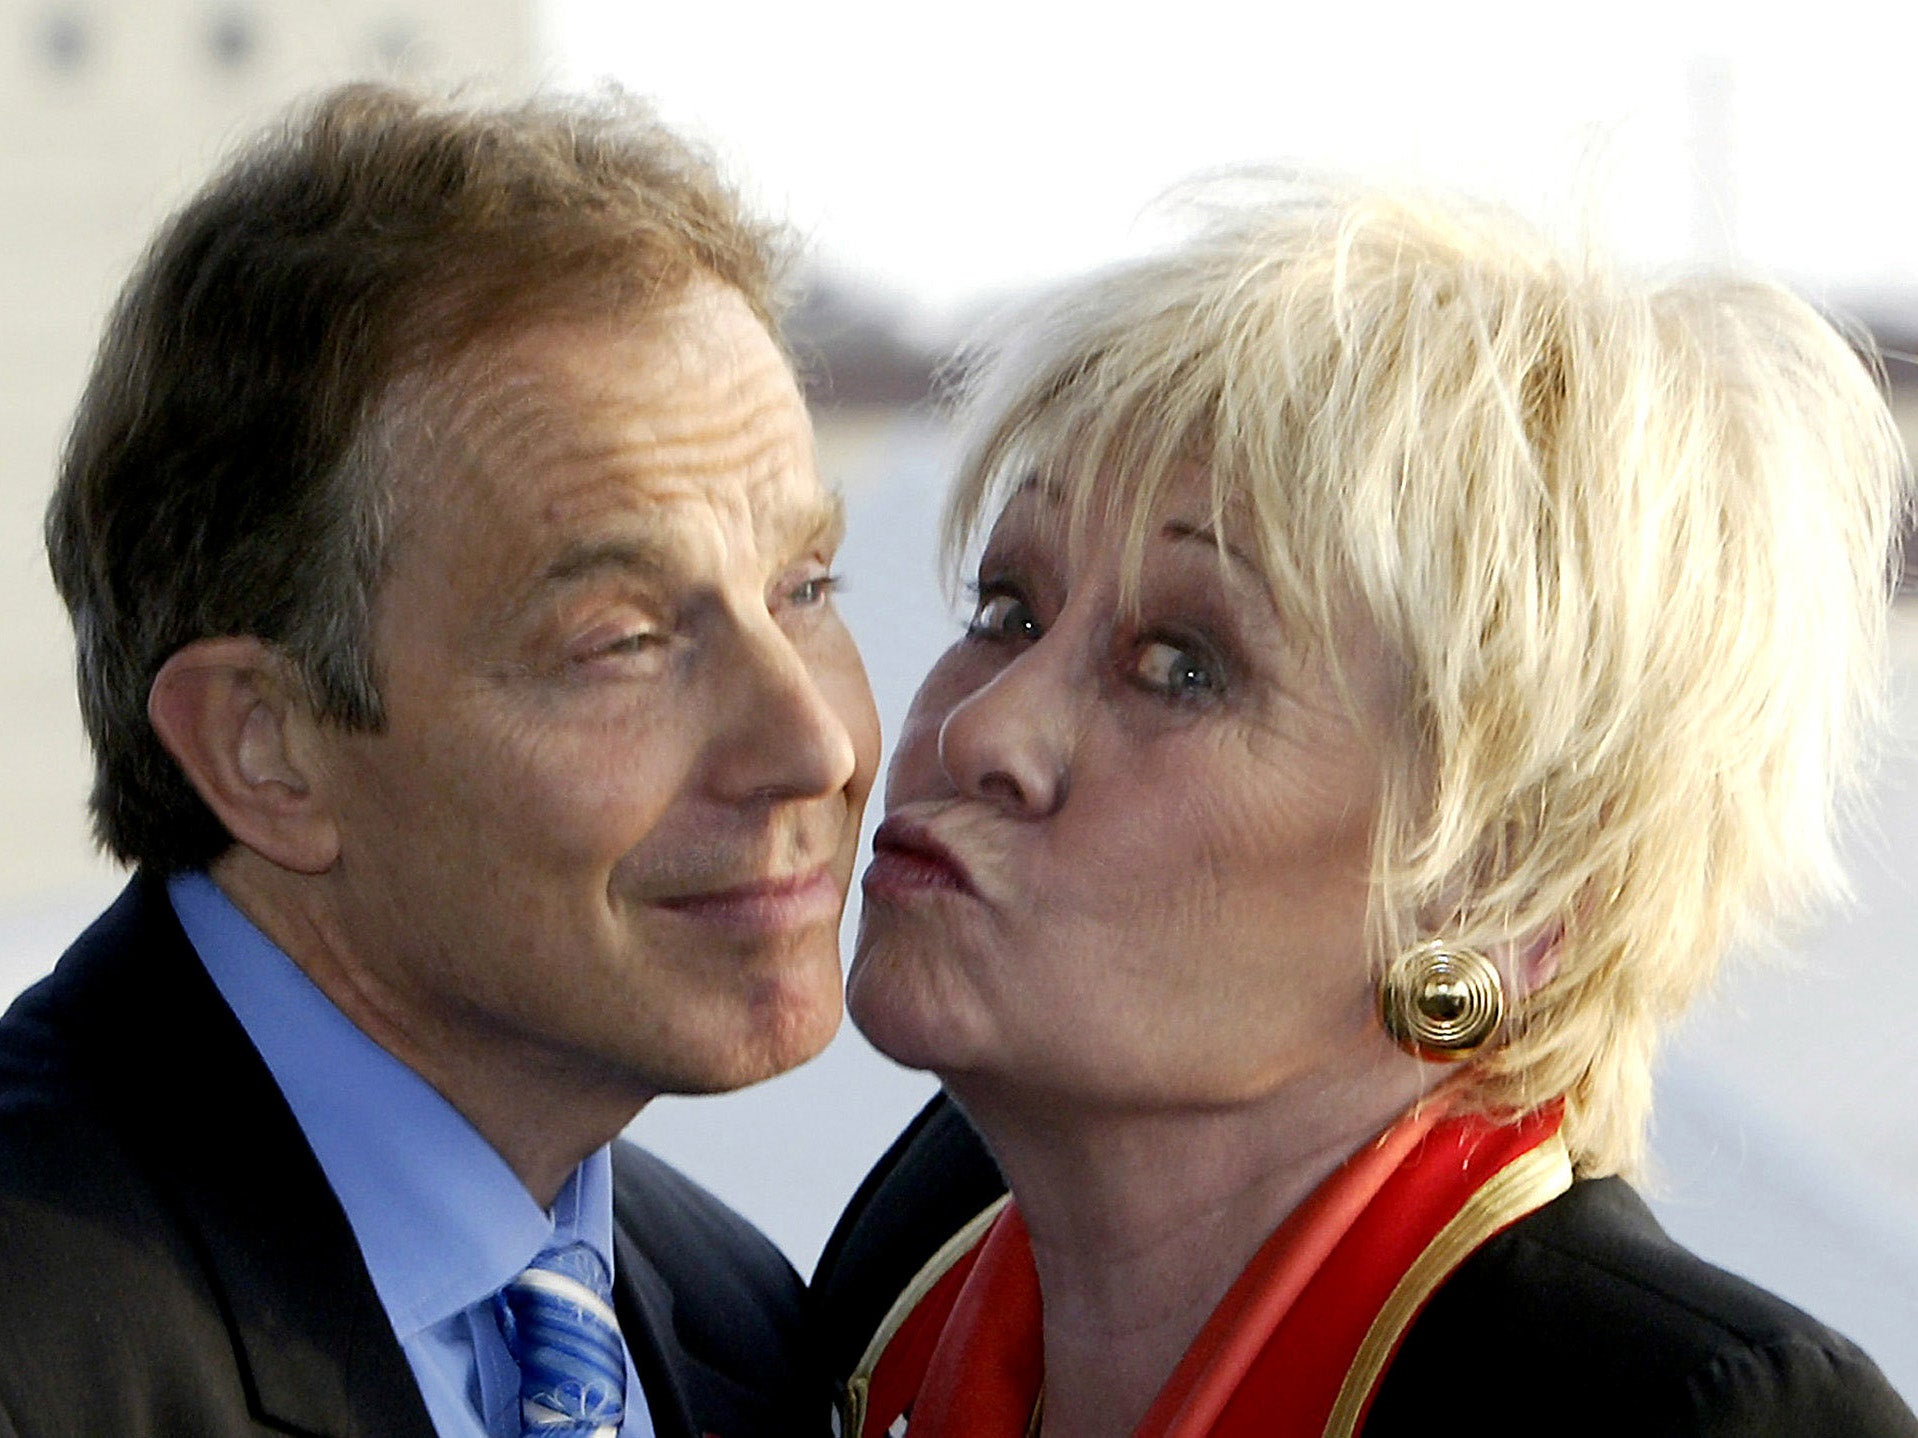 Former Prime Minister Tony Blair accepts a kiss from the television star, who played Vera for 34 years